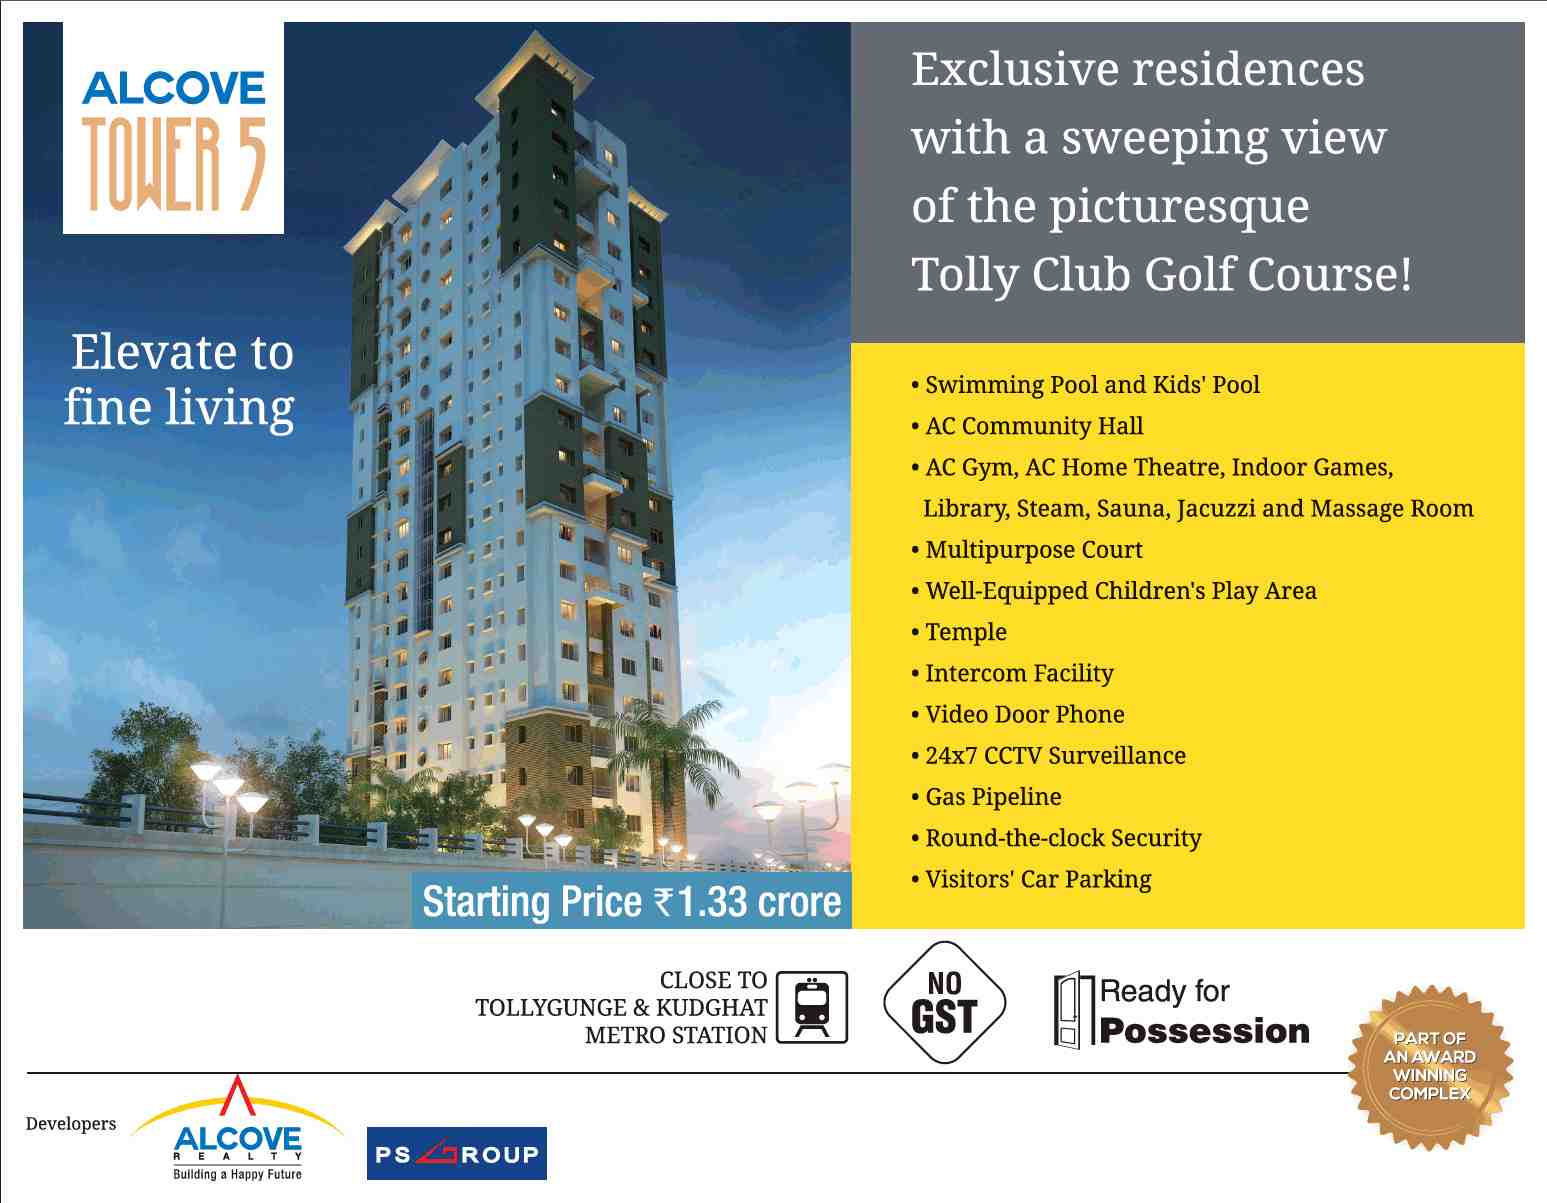 PS Alcove Tower 5 is ready for possession in Kolkata